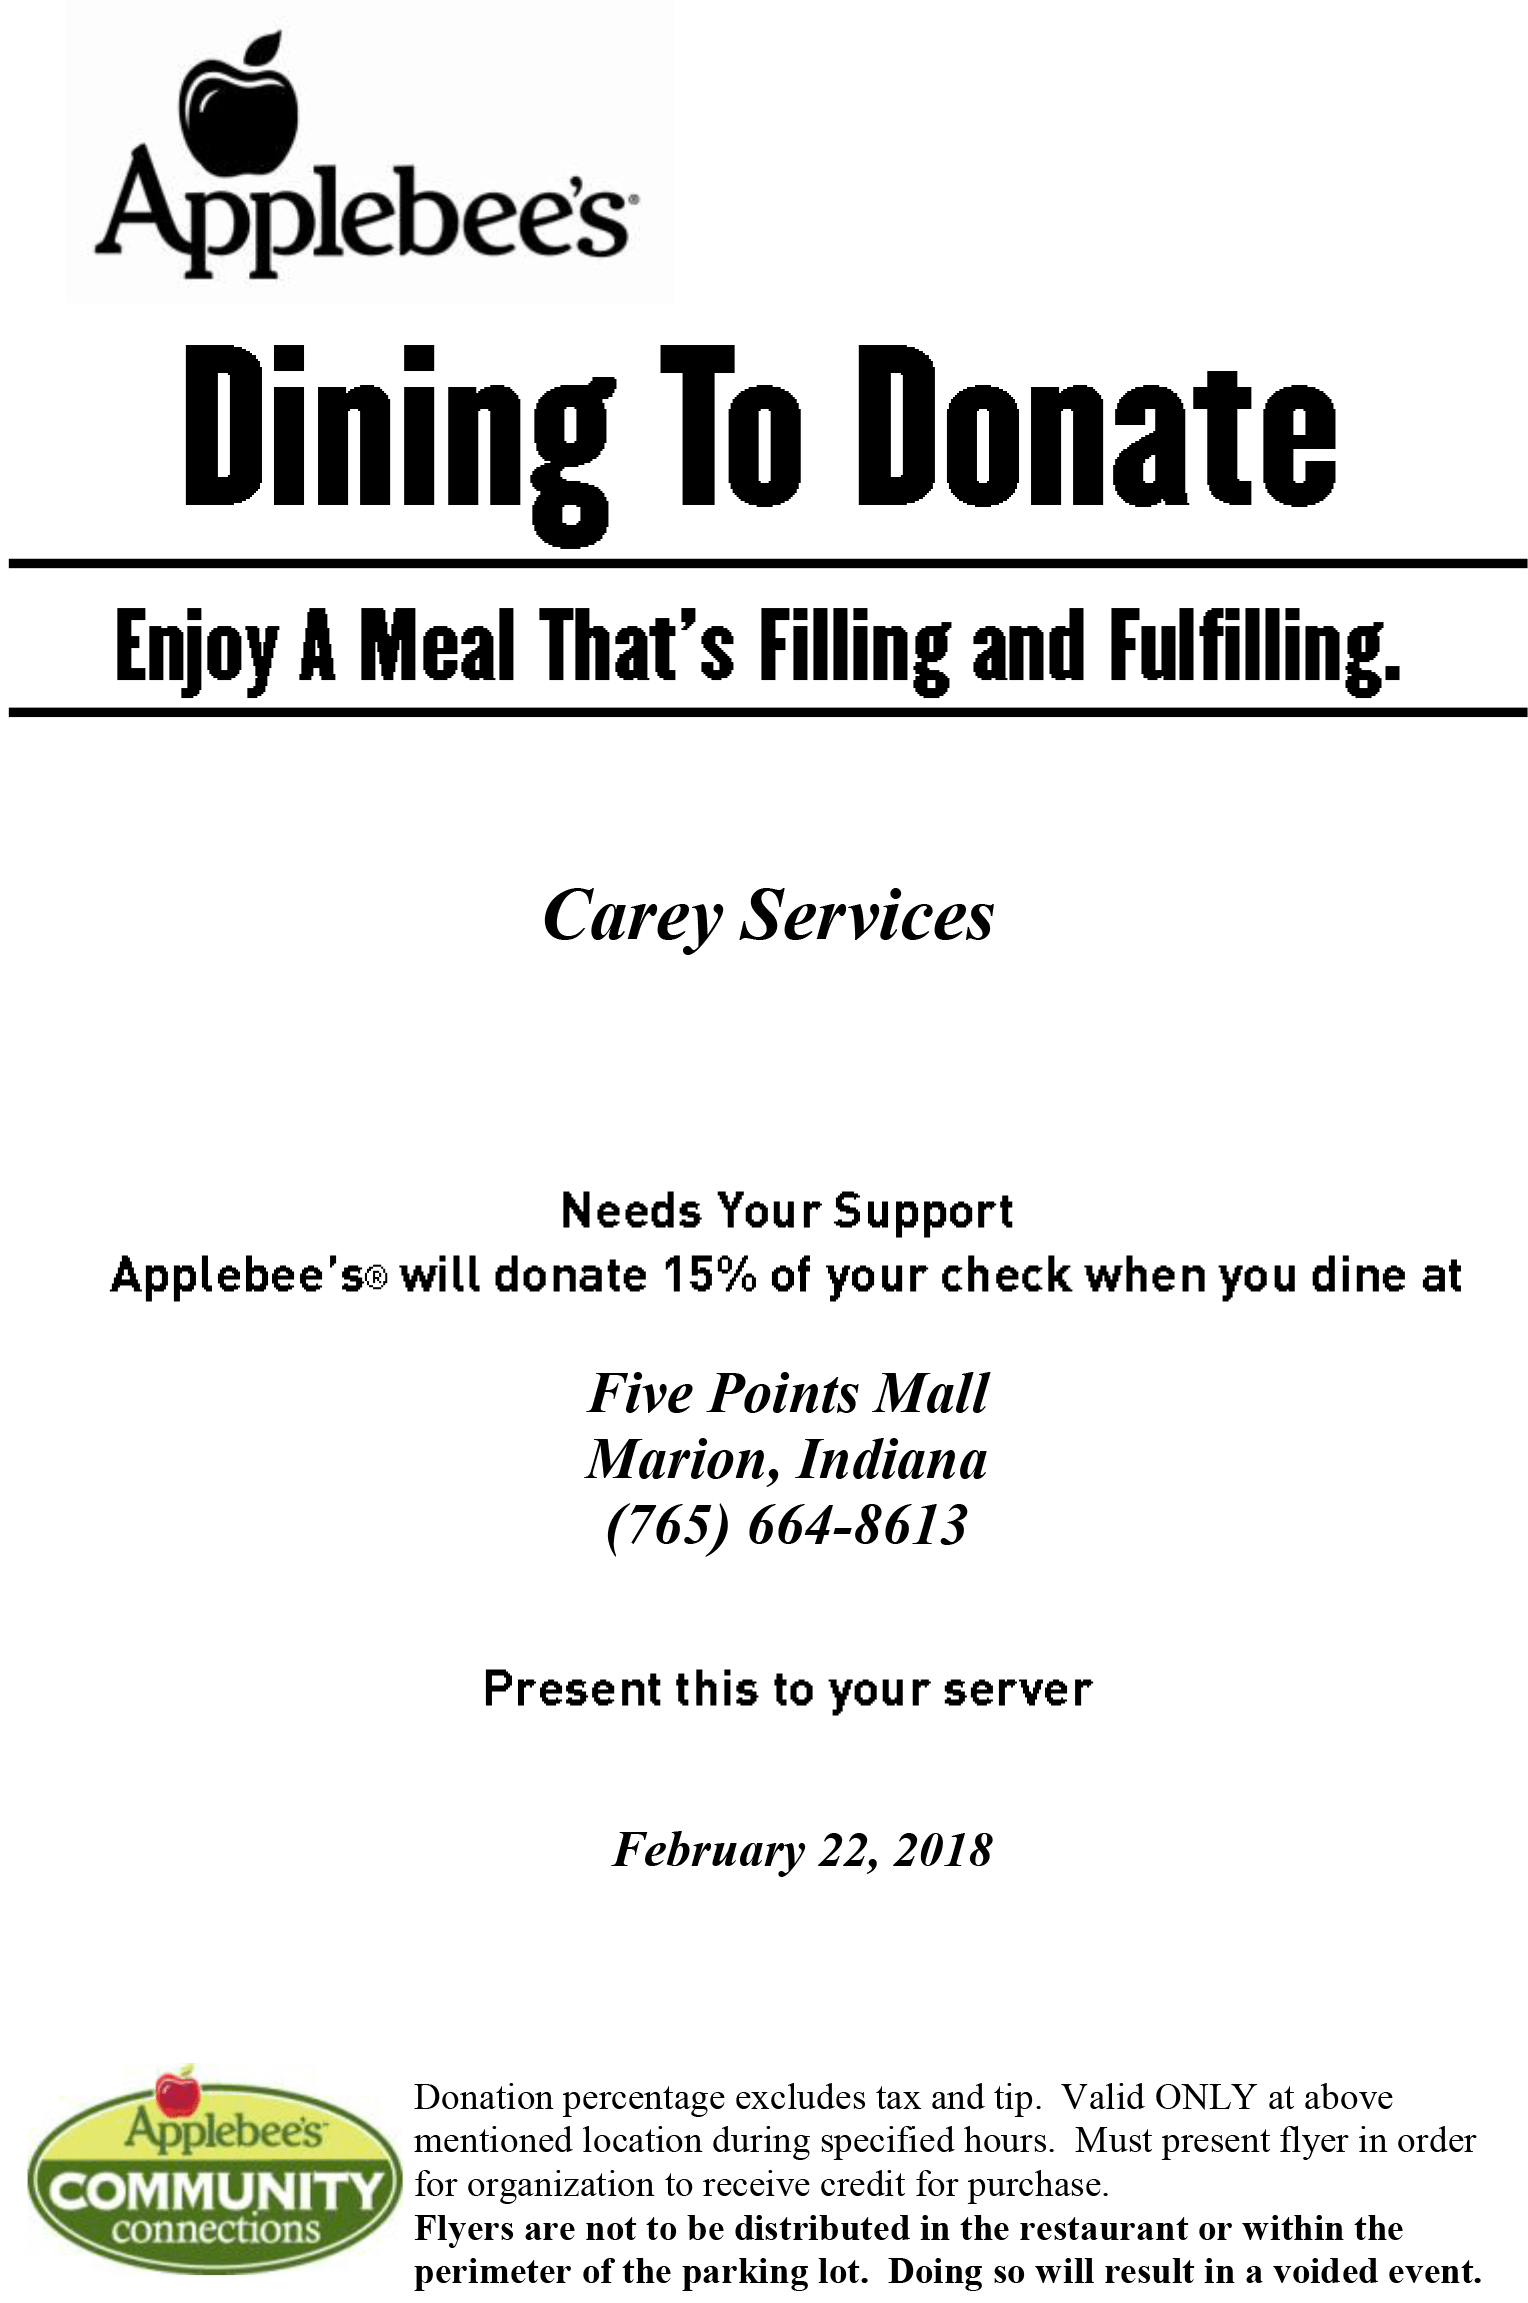 Applebee's Community Connections Logo - Carey Services – Applebee's Dining to Donate Event Feb. 22